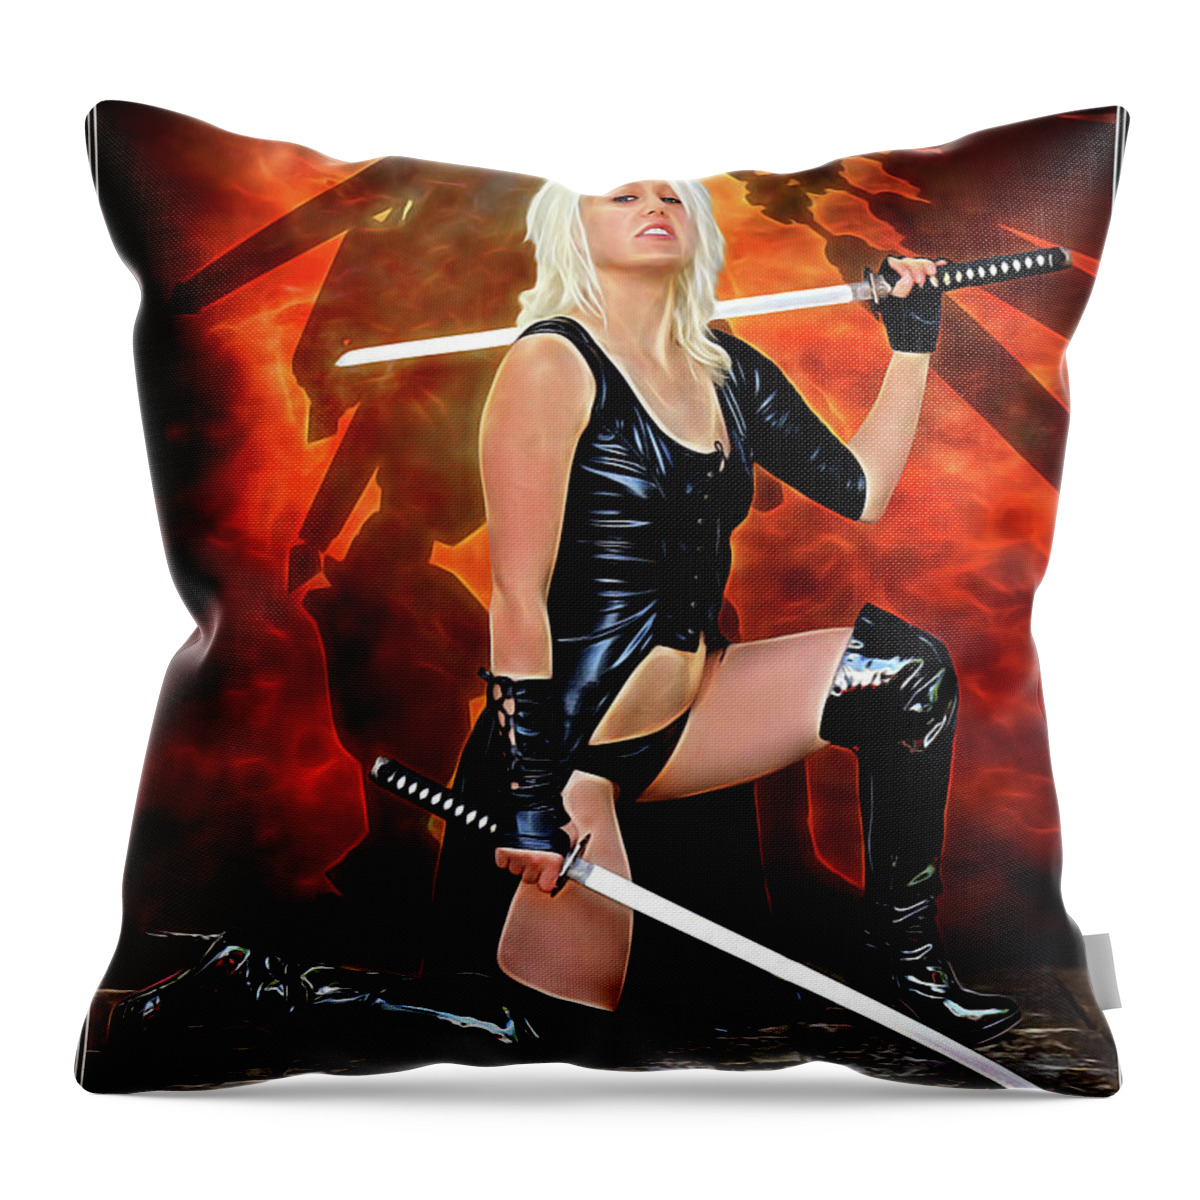 Blade Throw Pillow featuring the photograph Blades Of Vengeance by Jon Volden